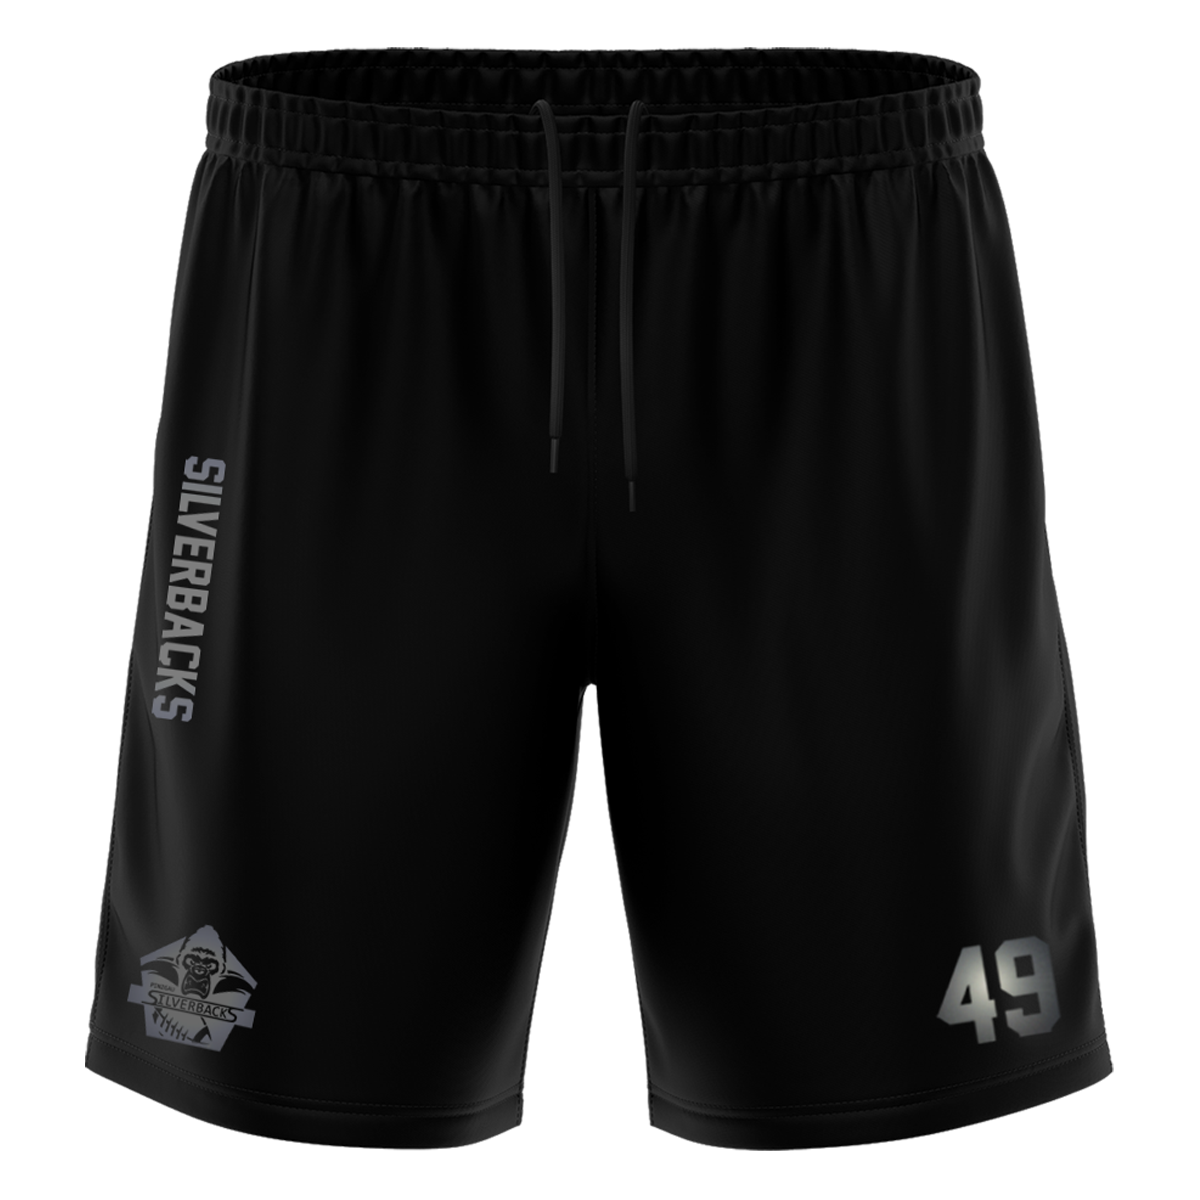 Silverbacks "Blackline" Training Short with Playernumber or Initials